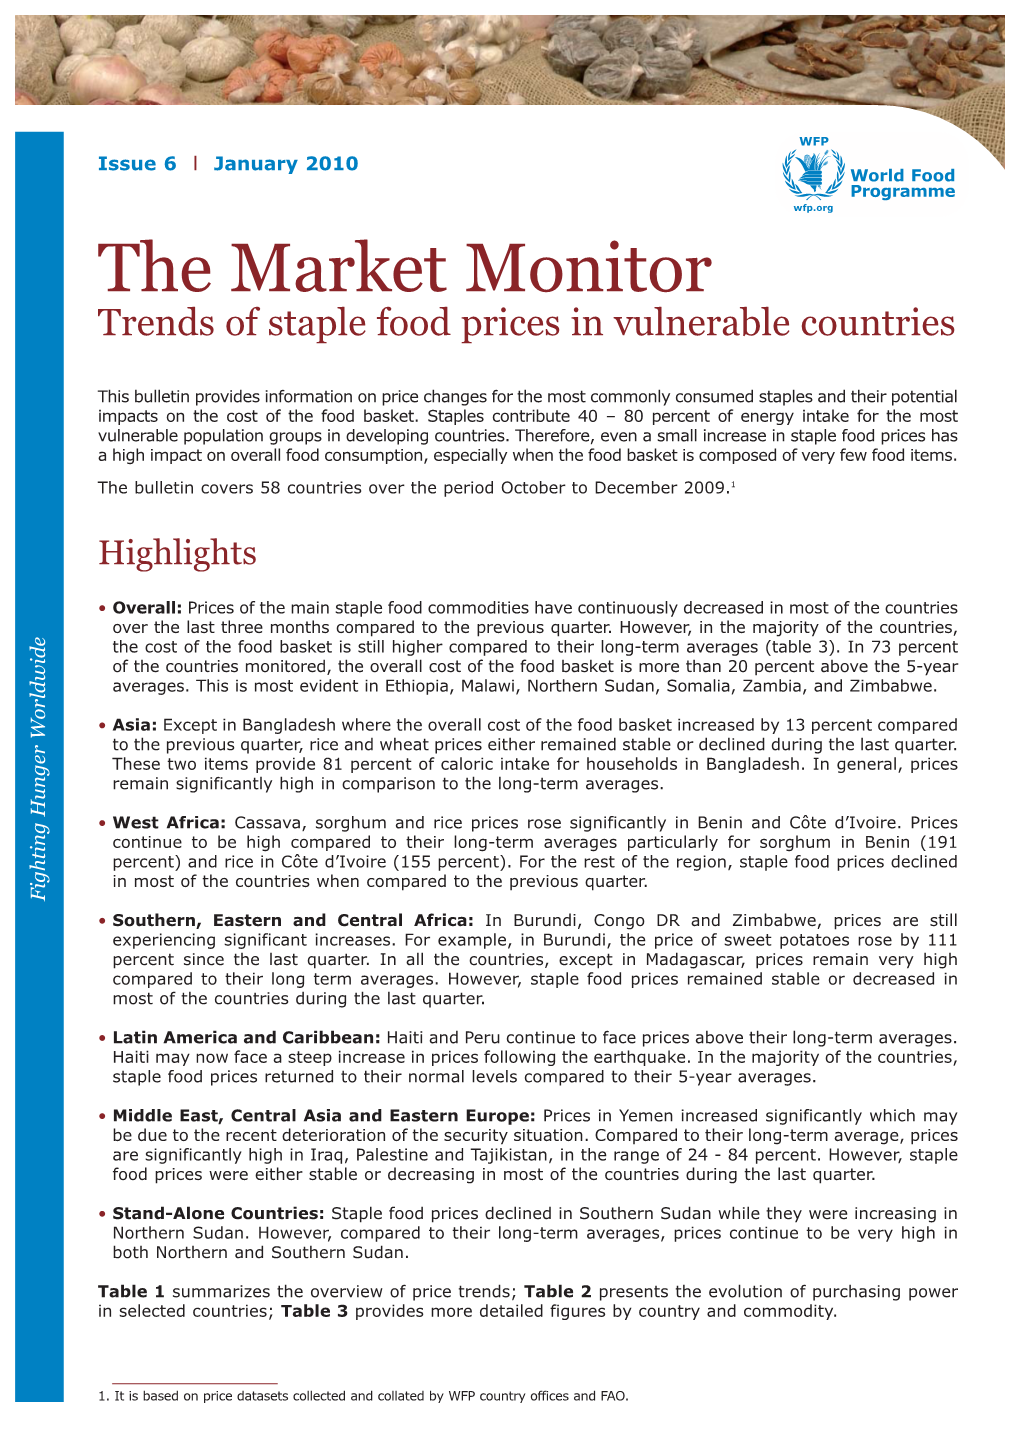 The Market Monitor Trends of Staple Food Prices in Vulnerable Countries